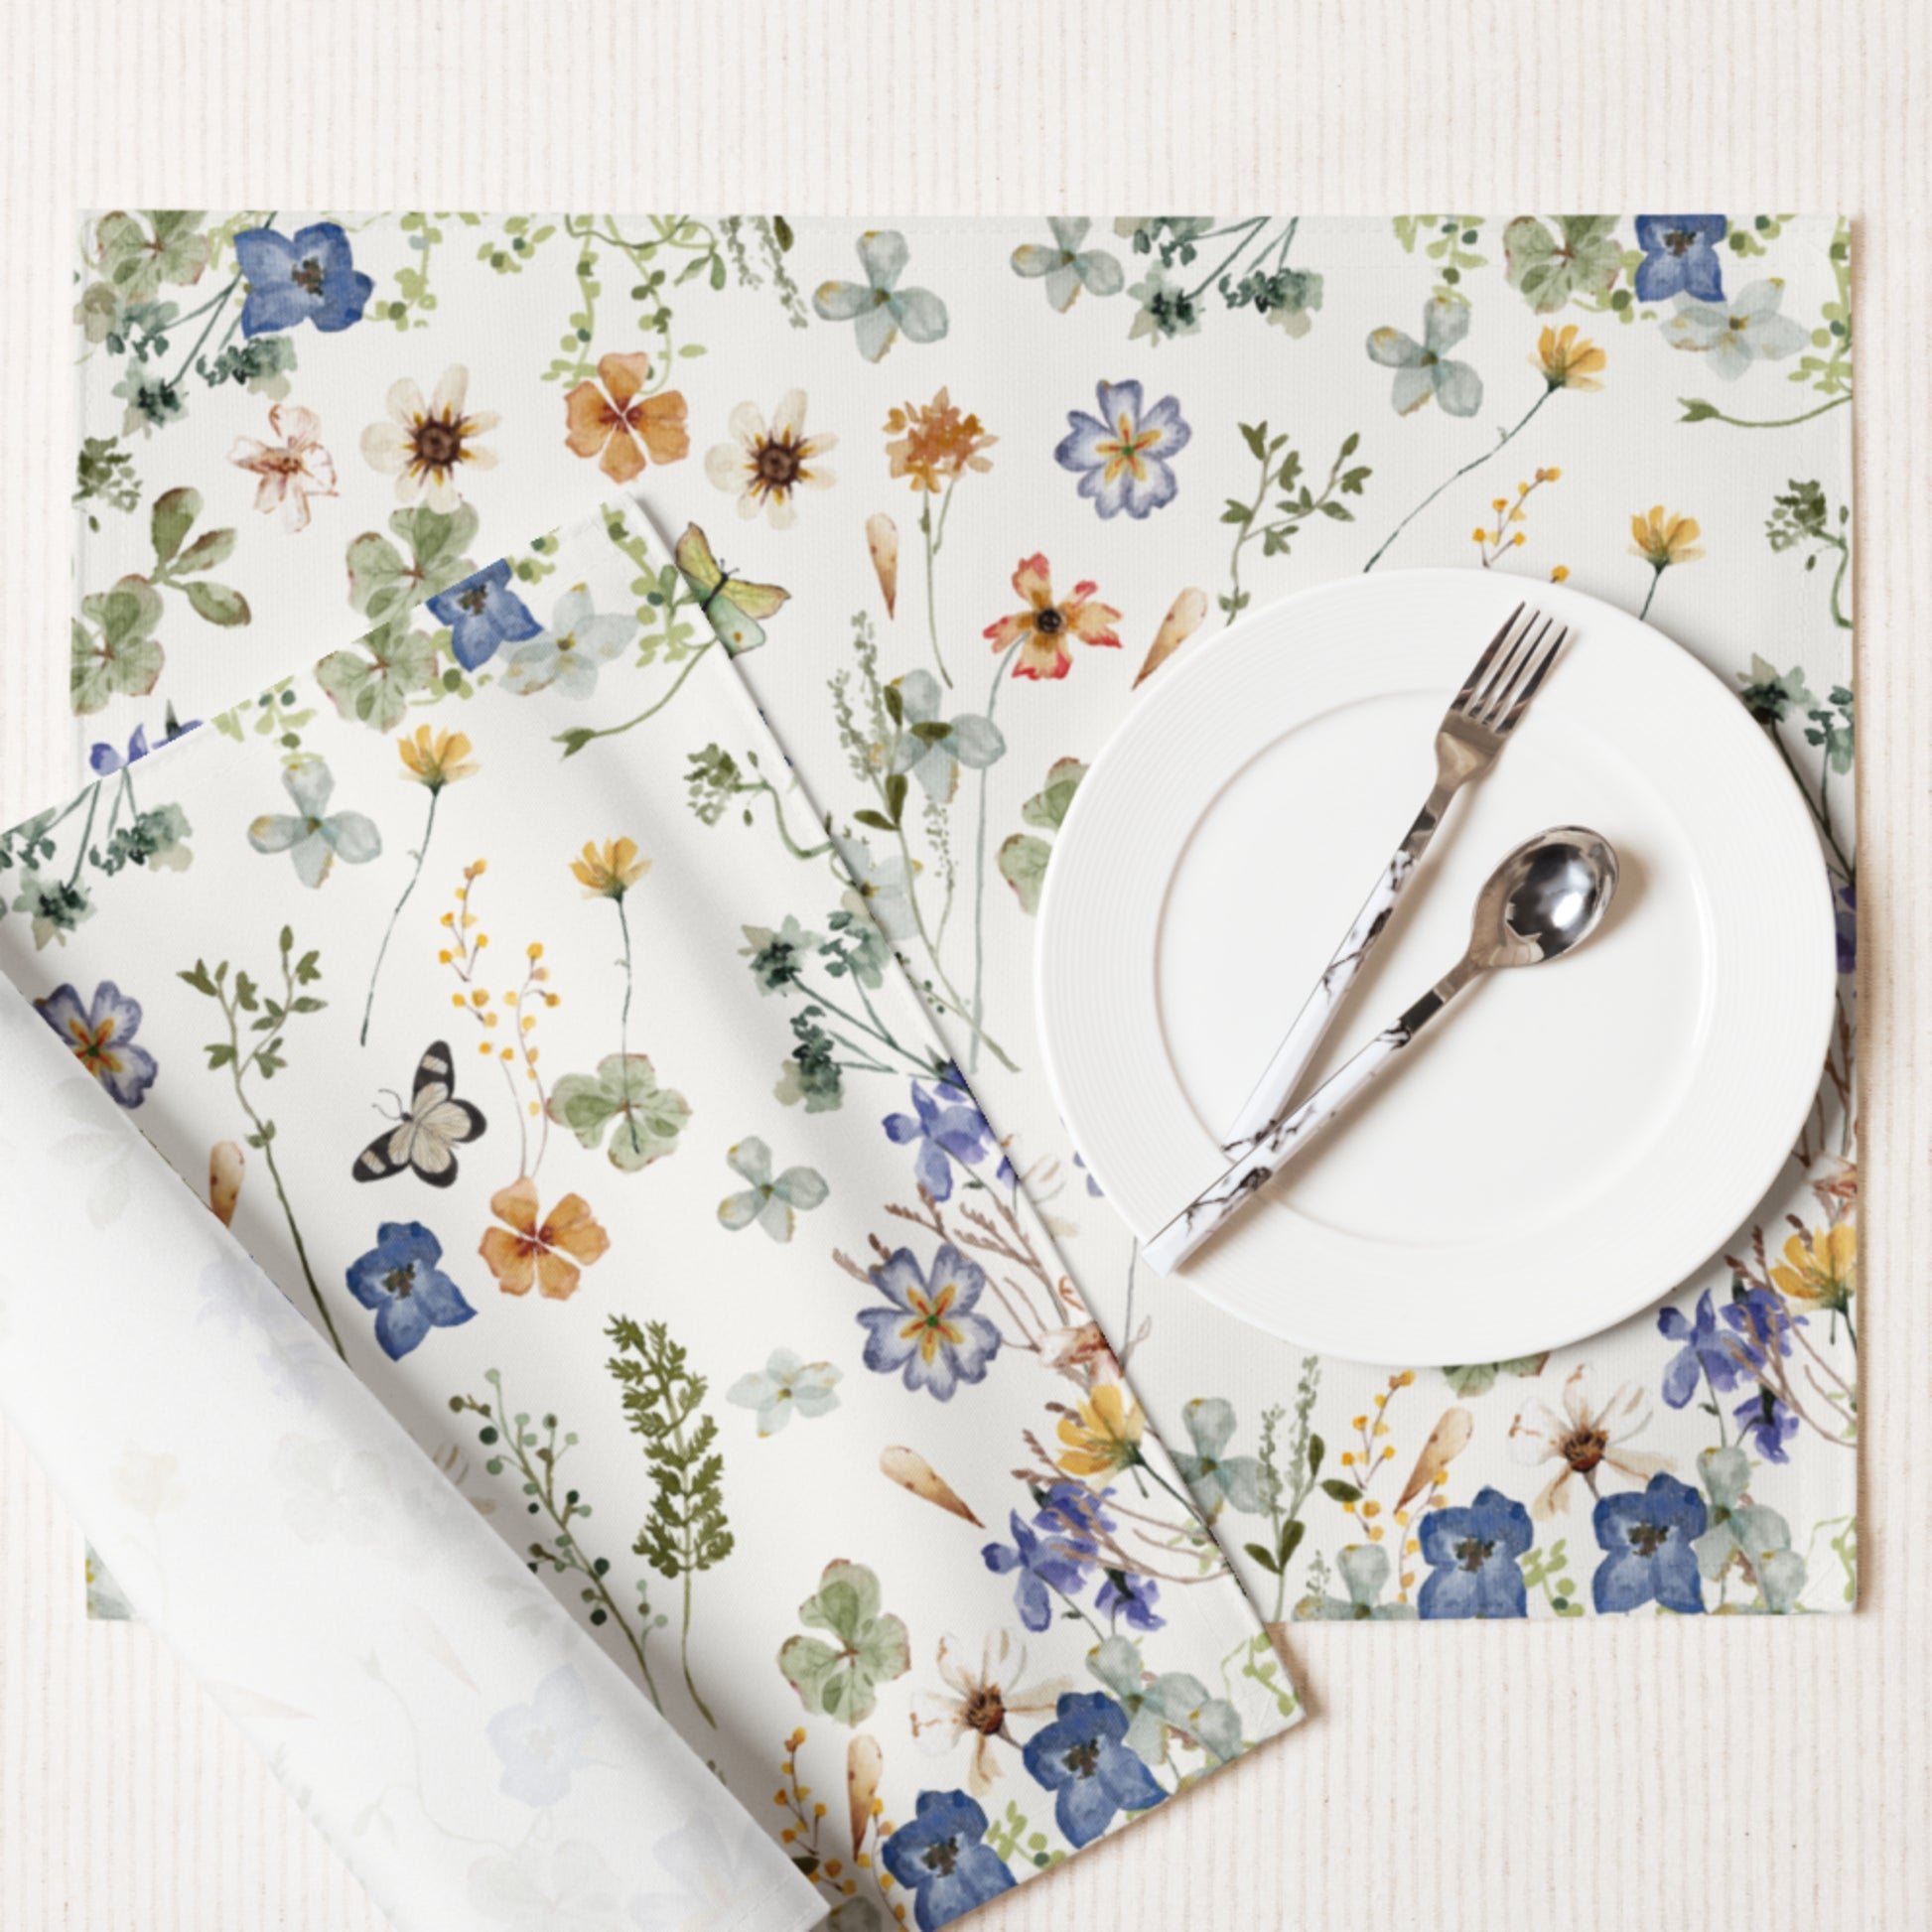 Wildflowers Floral PLACEMAT - White Tone from BLUE WATER SONGS